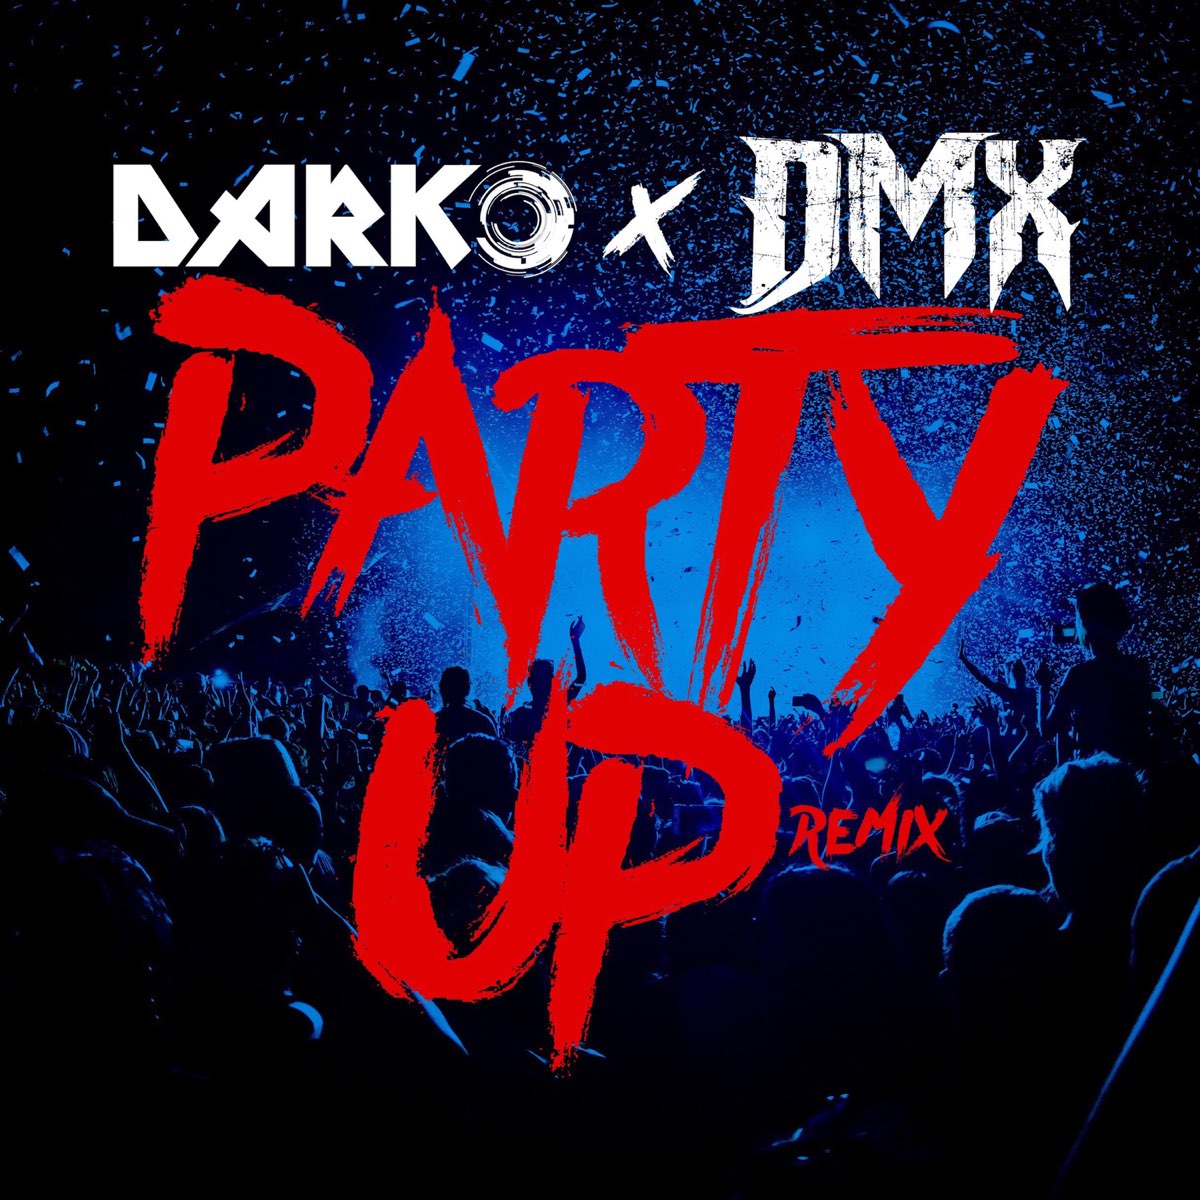 Pat up. DMX - Party up (up in here). Party up. ДМХ парти ап. Party up (up in here) (Darko Remix).